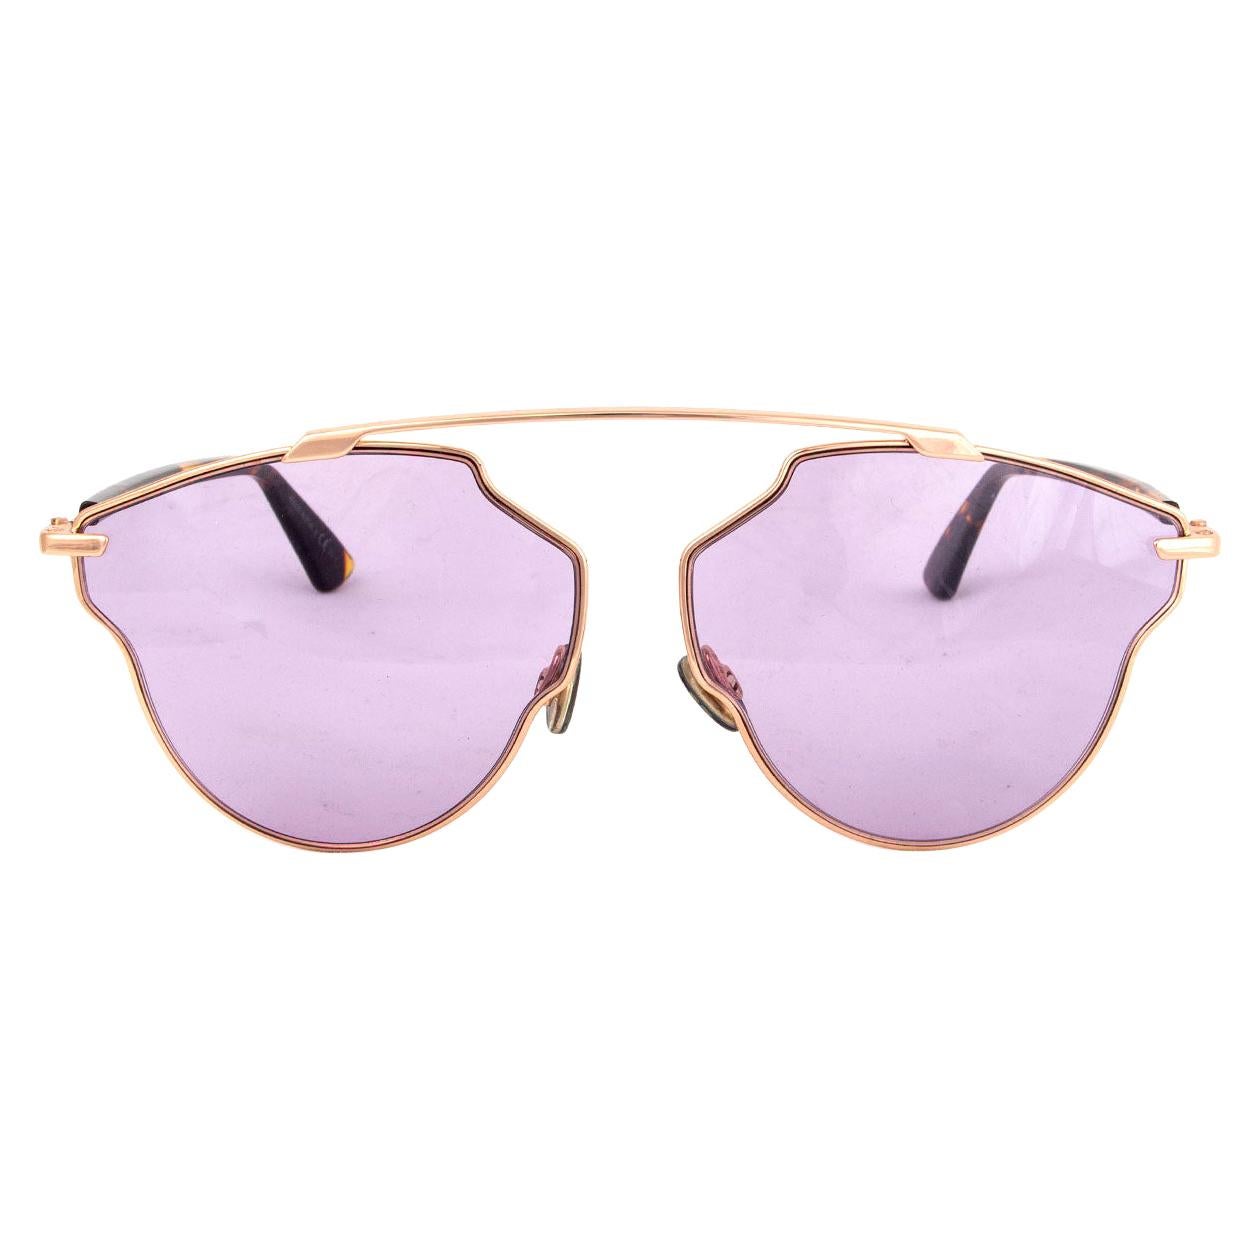 Dior So Real - 1,075 For Sale on 1stDibs | dior so real sunglasses 